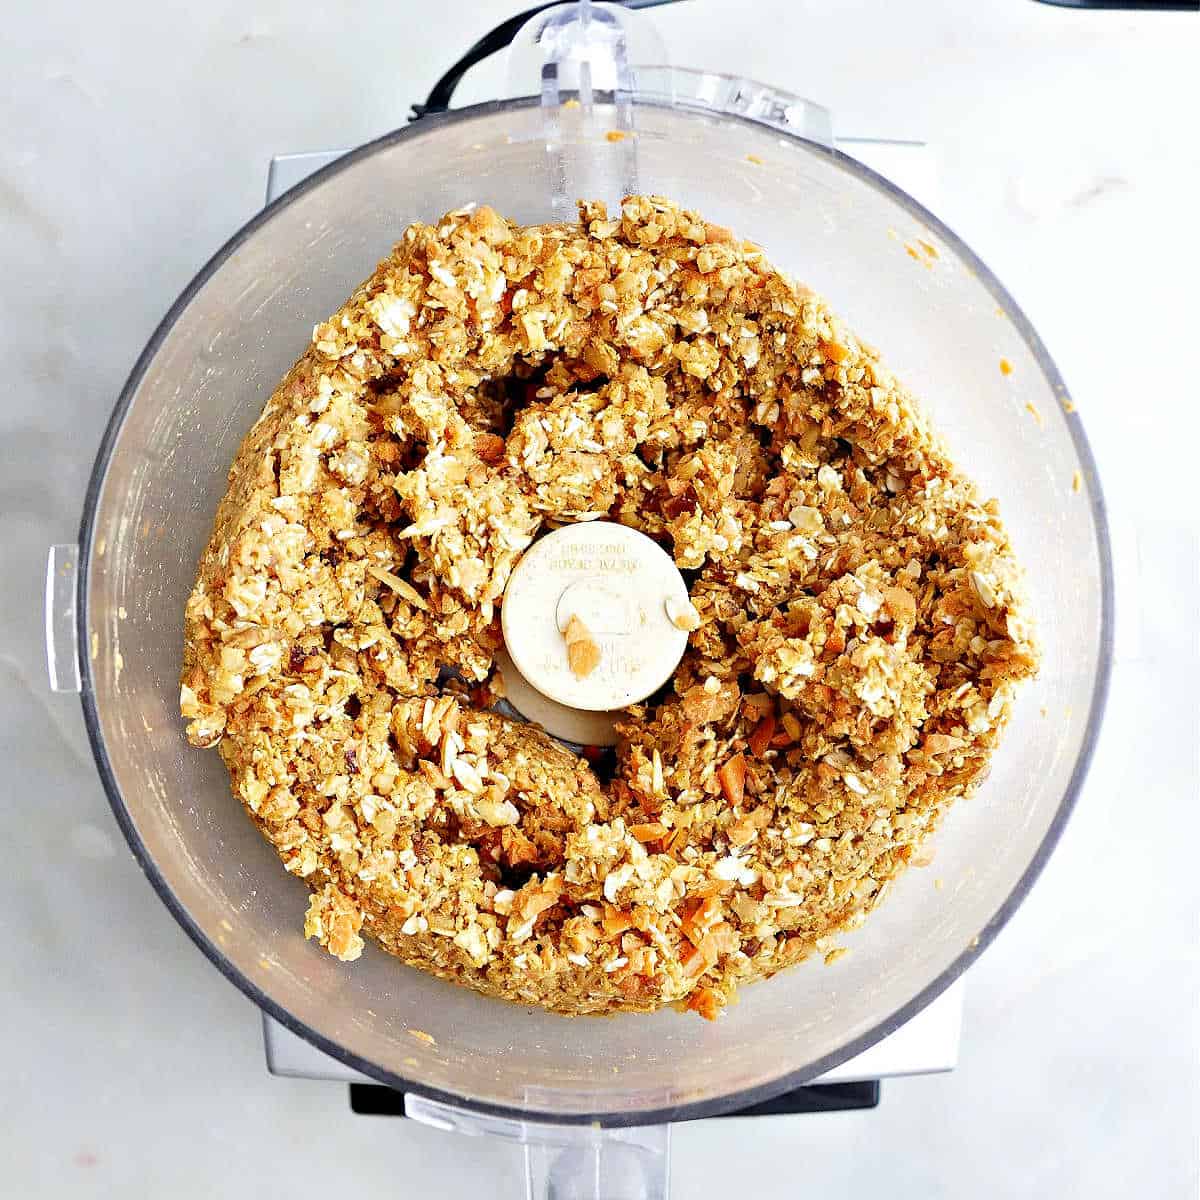 Carrot cake bar mixture in a food processor with the lid off.